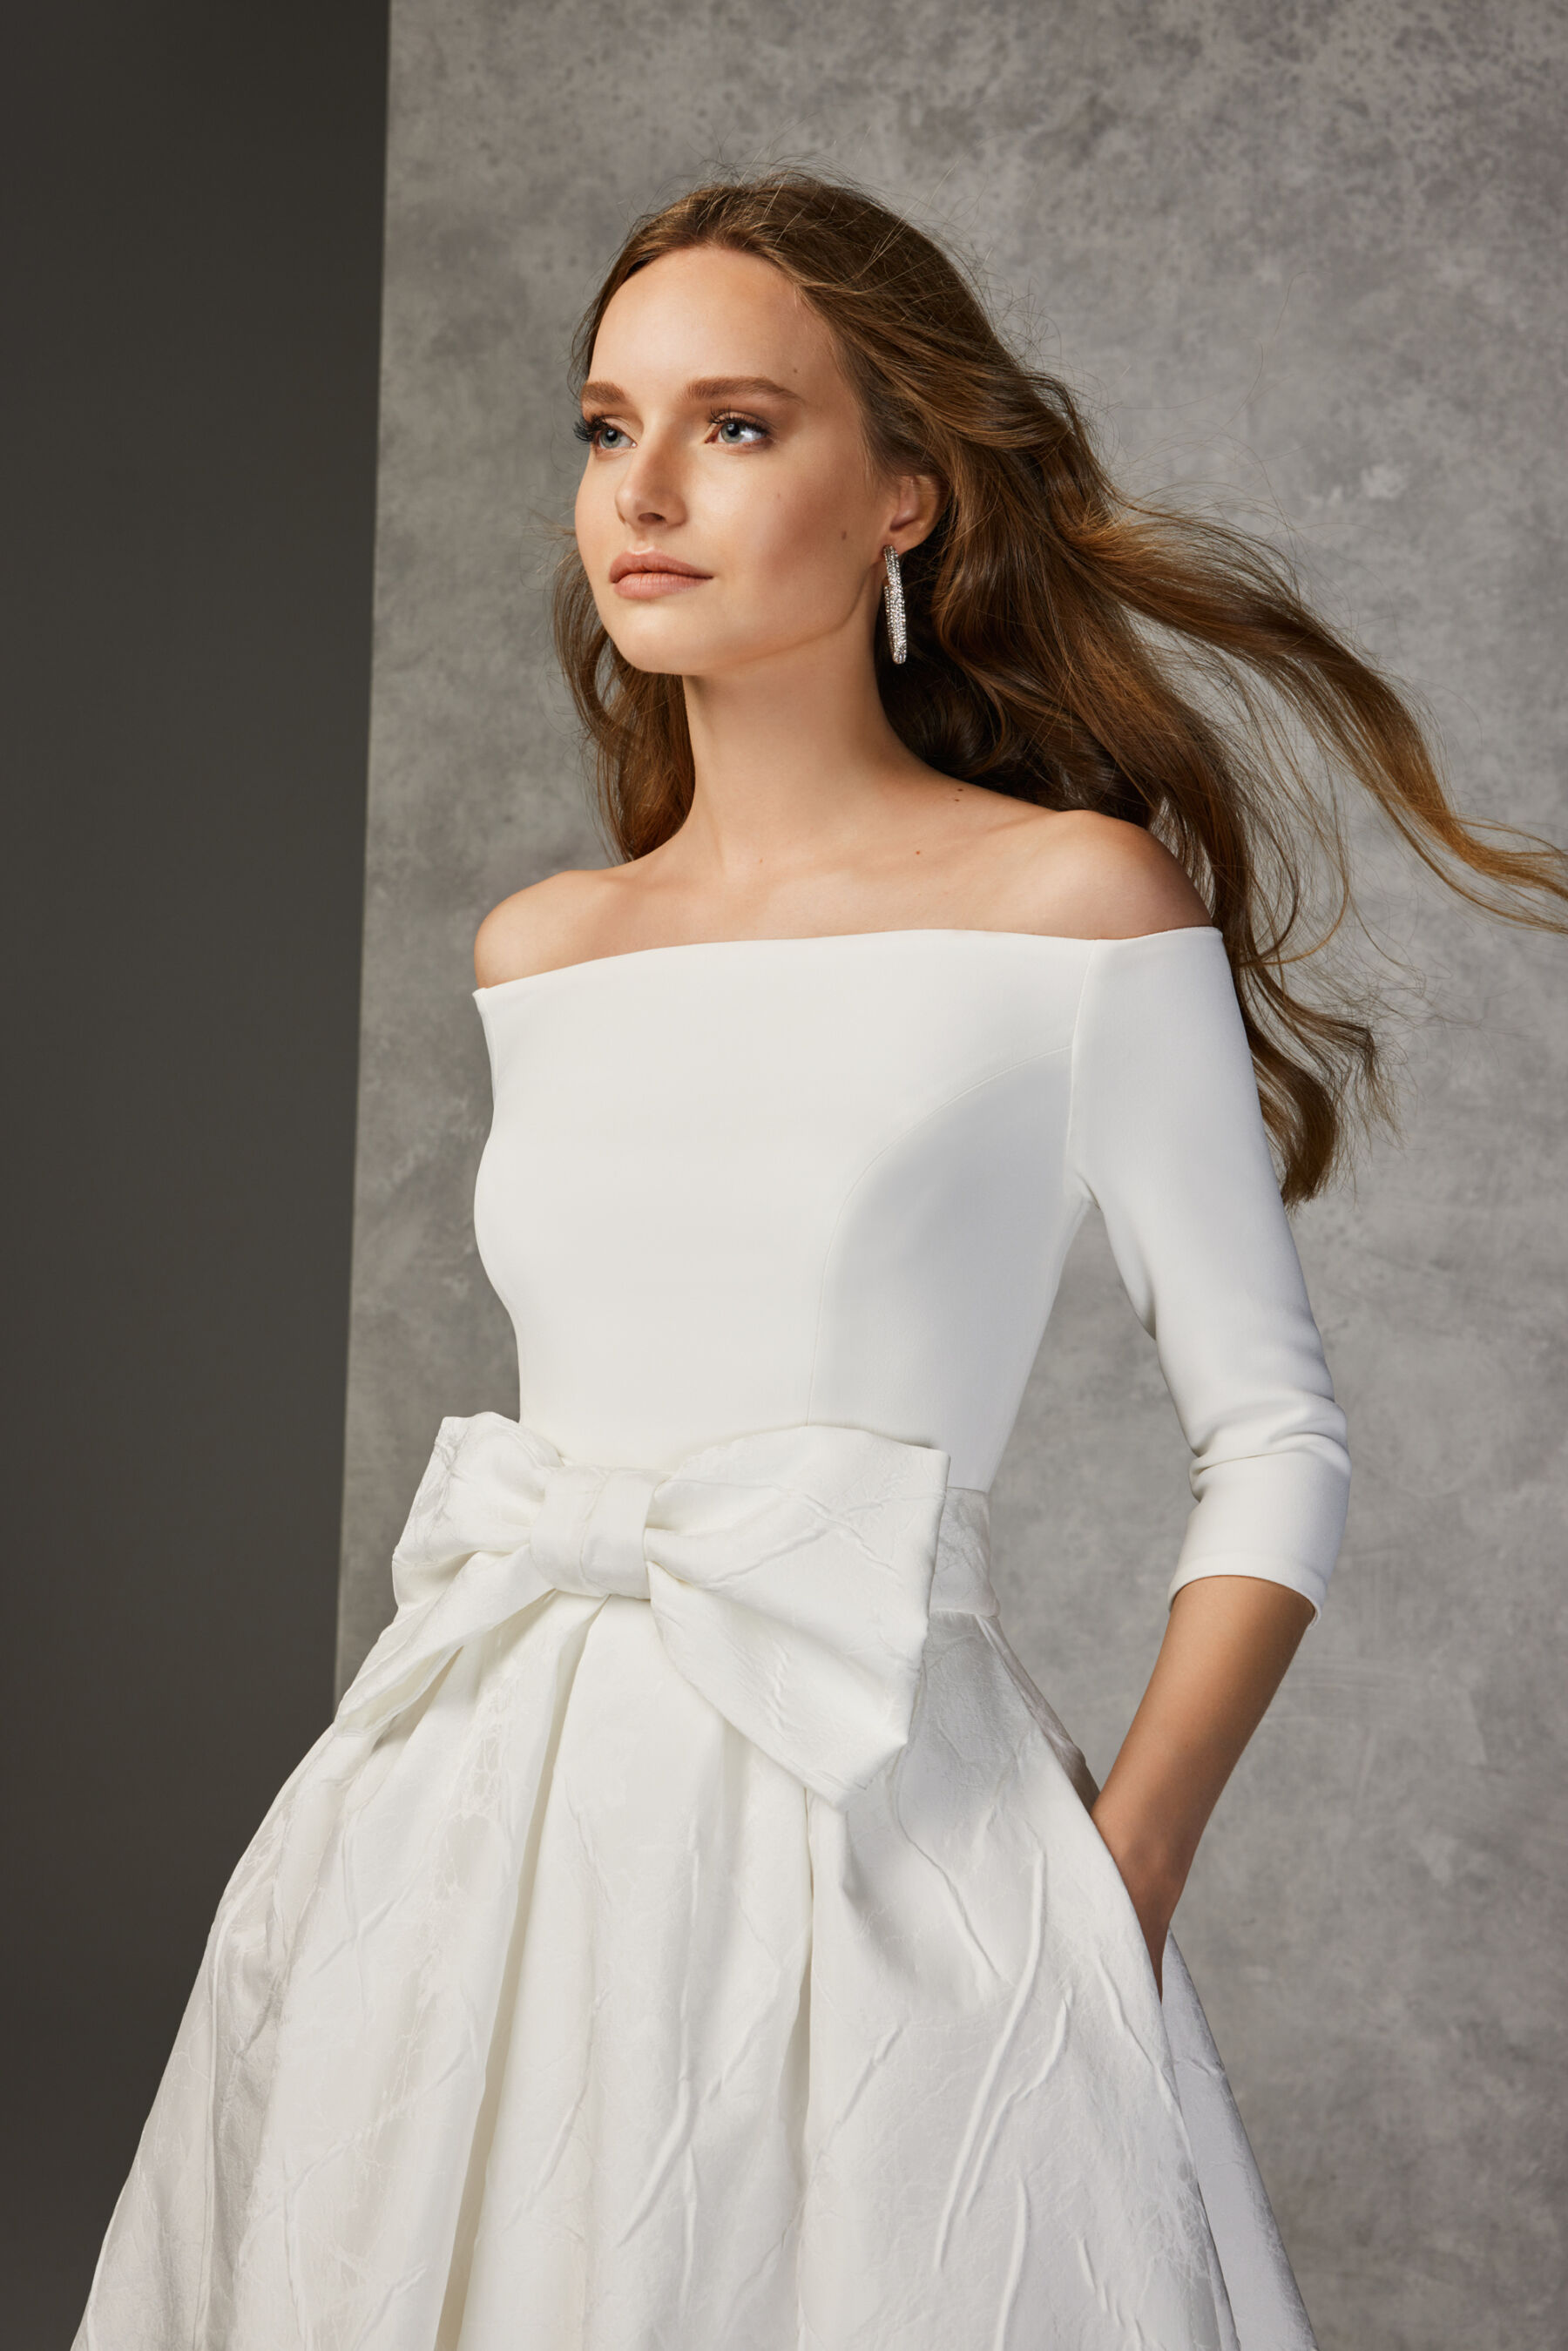 Wedding dress with bow around the waist, available at the Miss Bush pop up sample sale, April 2023.